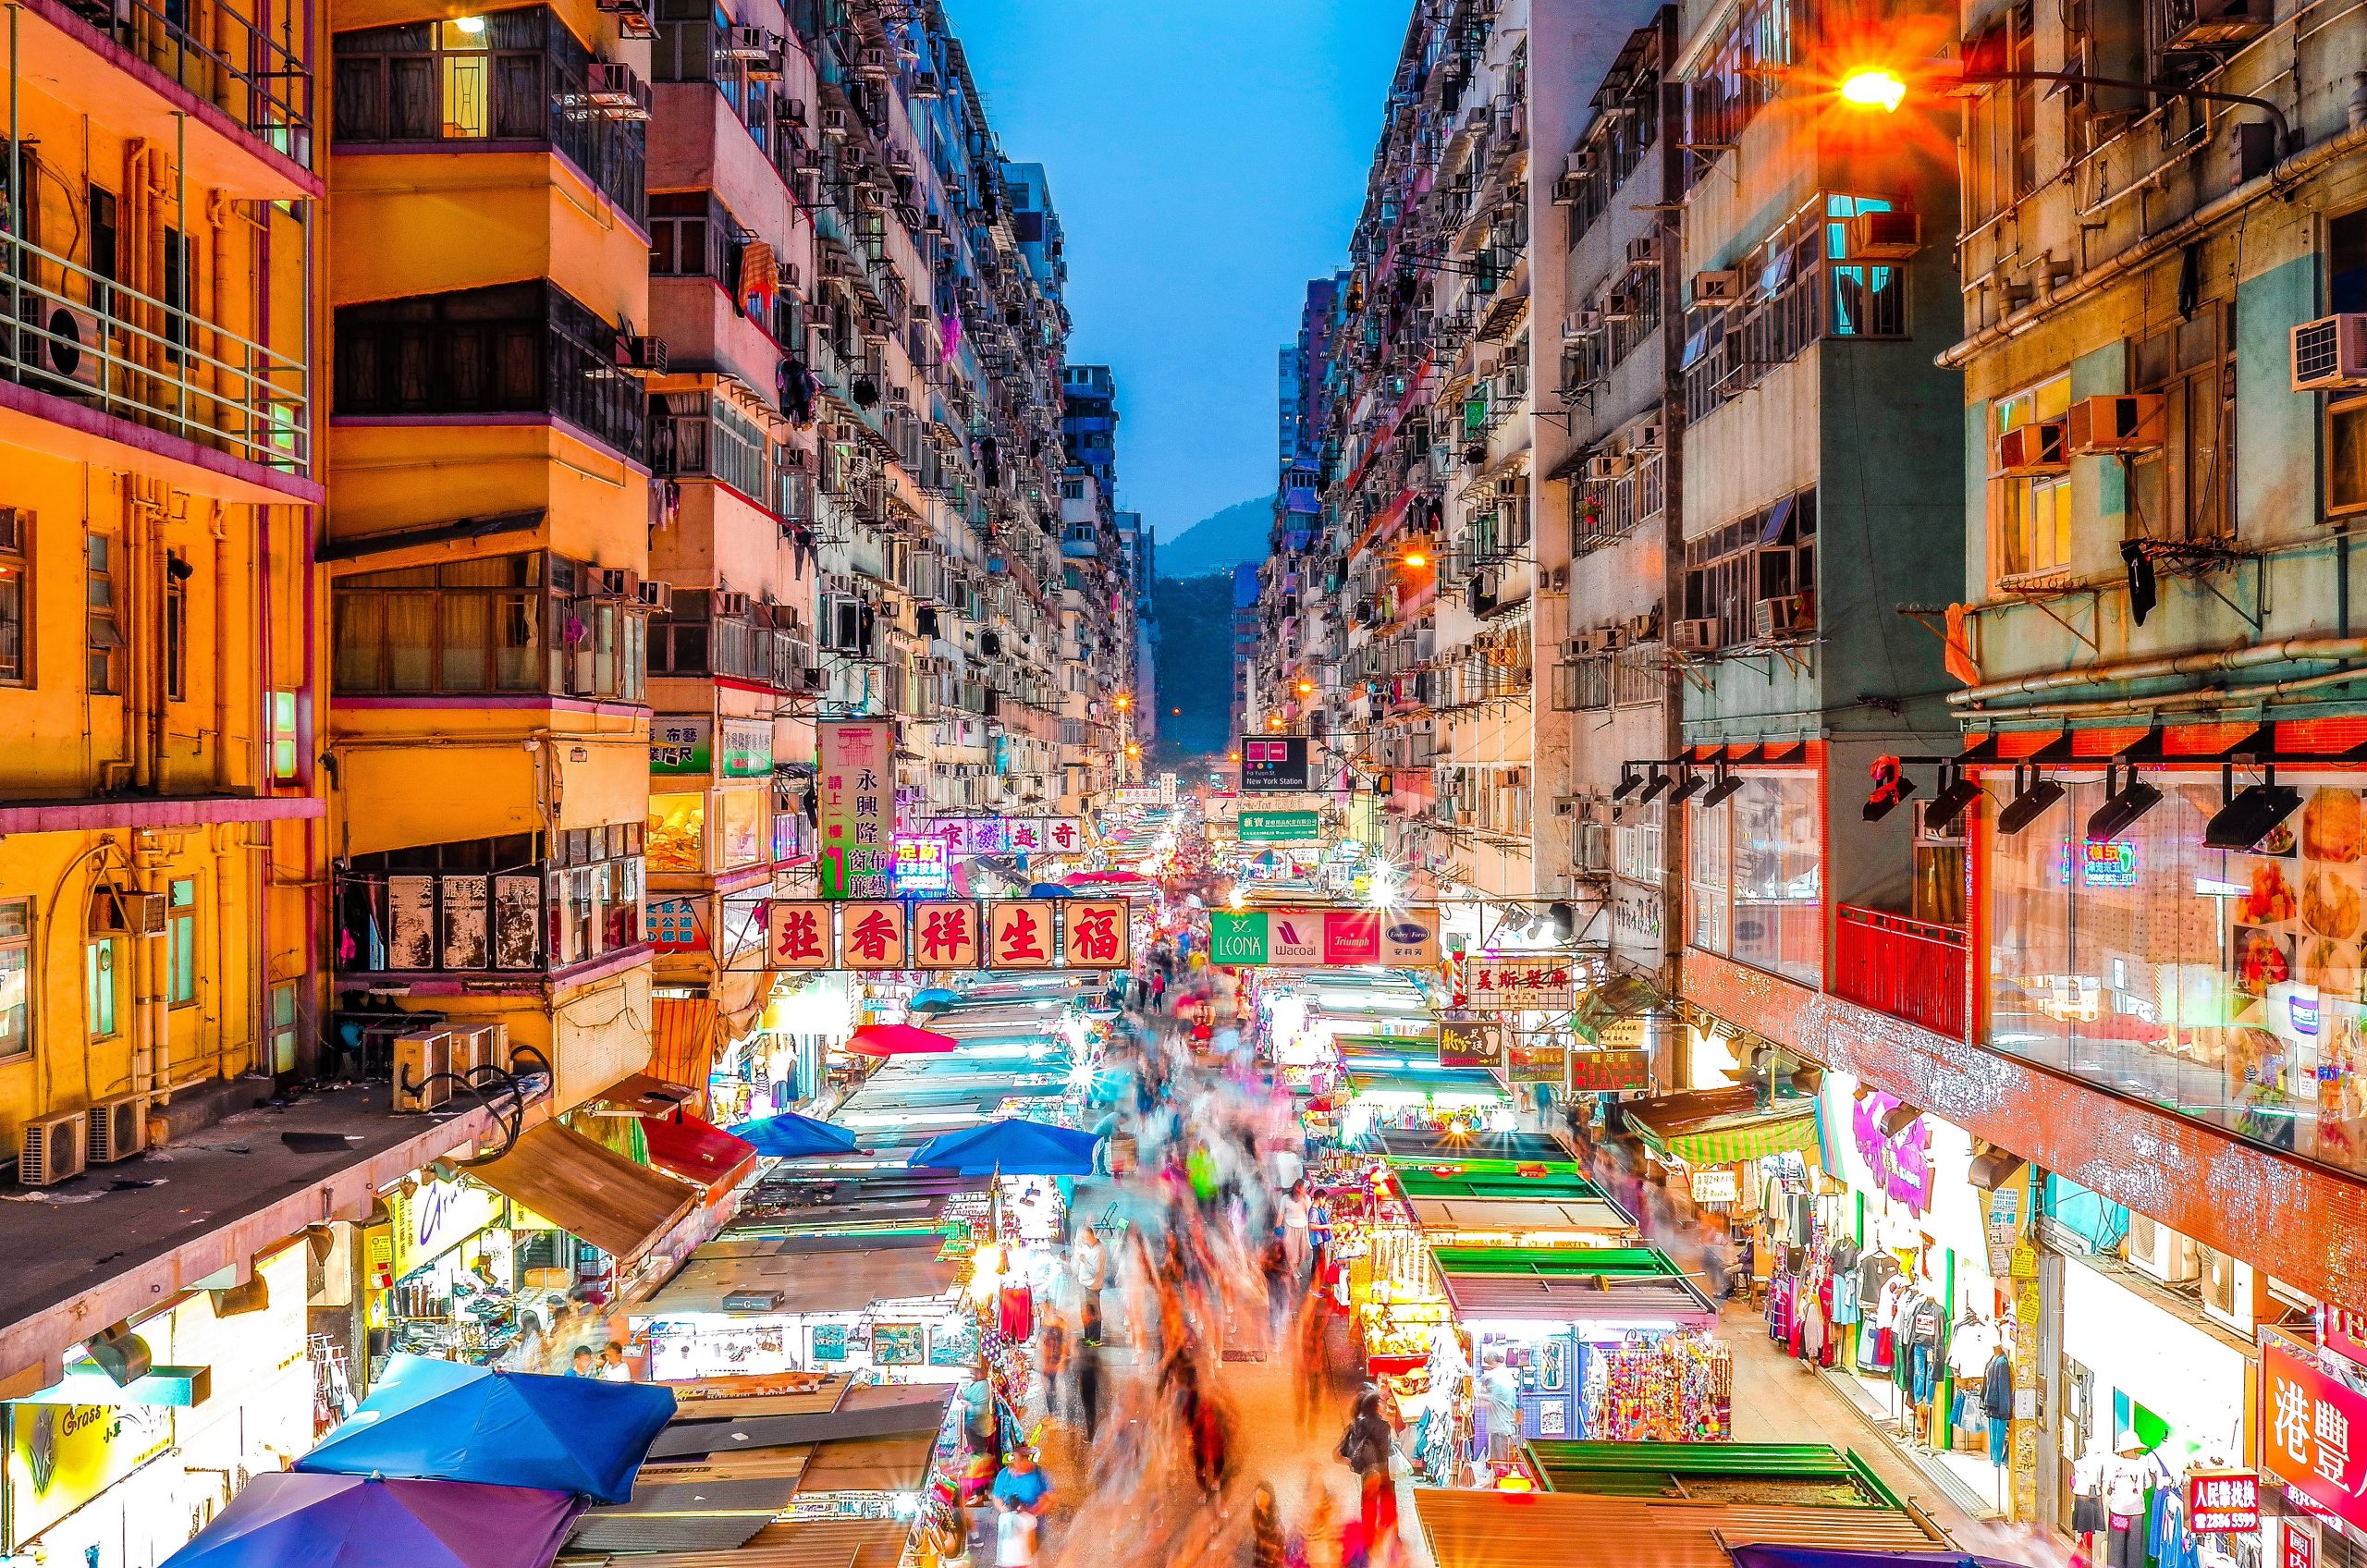 Where to stay in Hong Kong